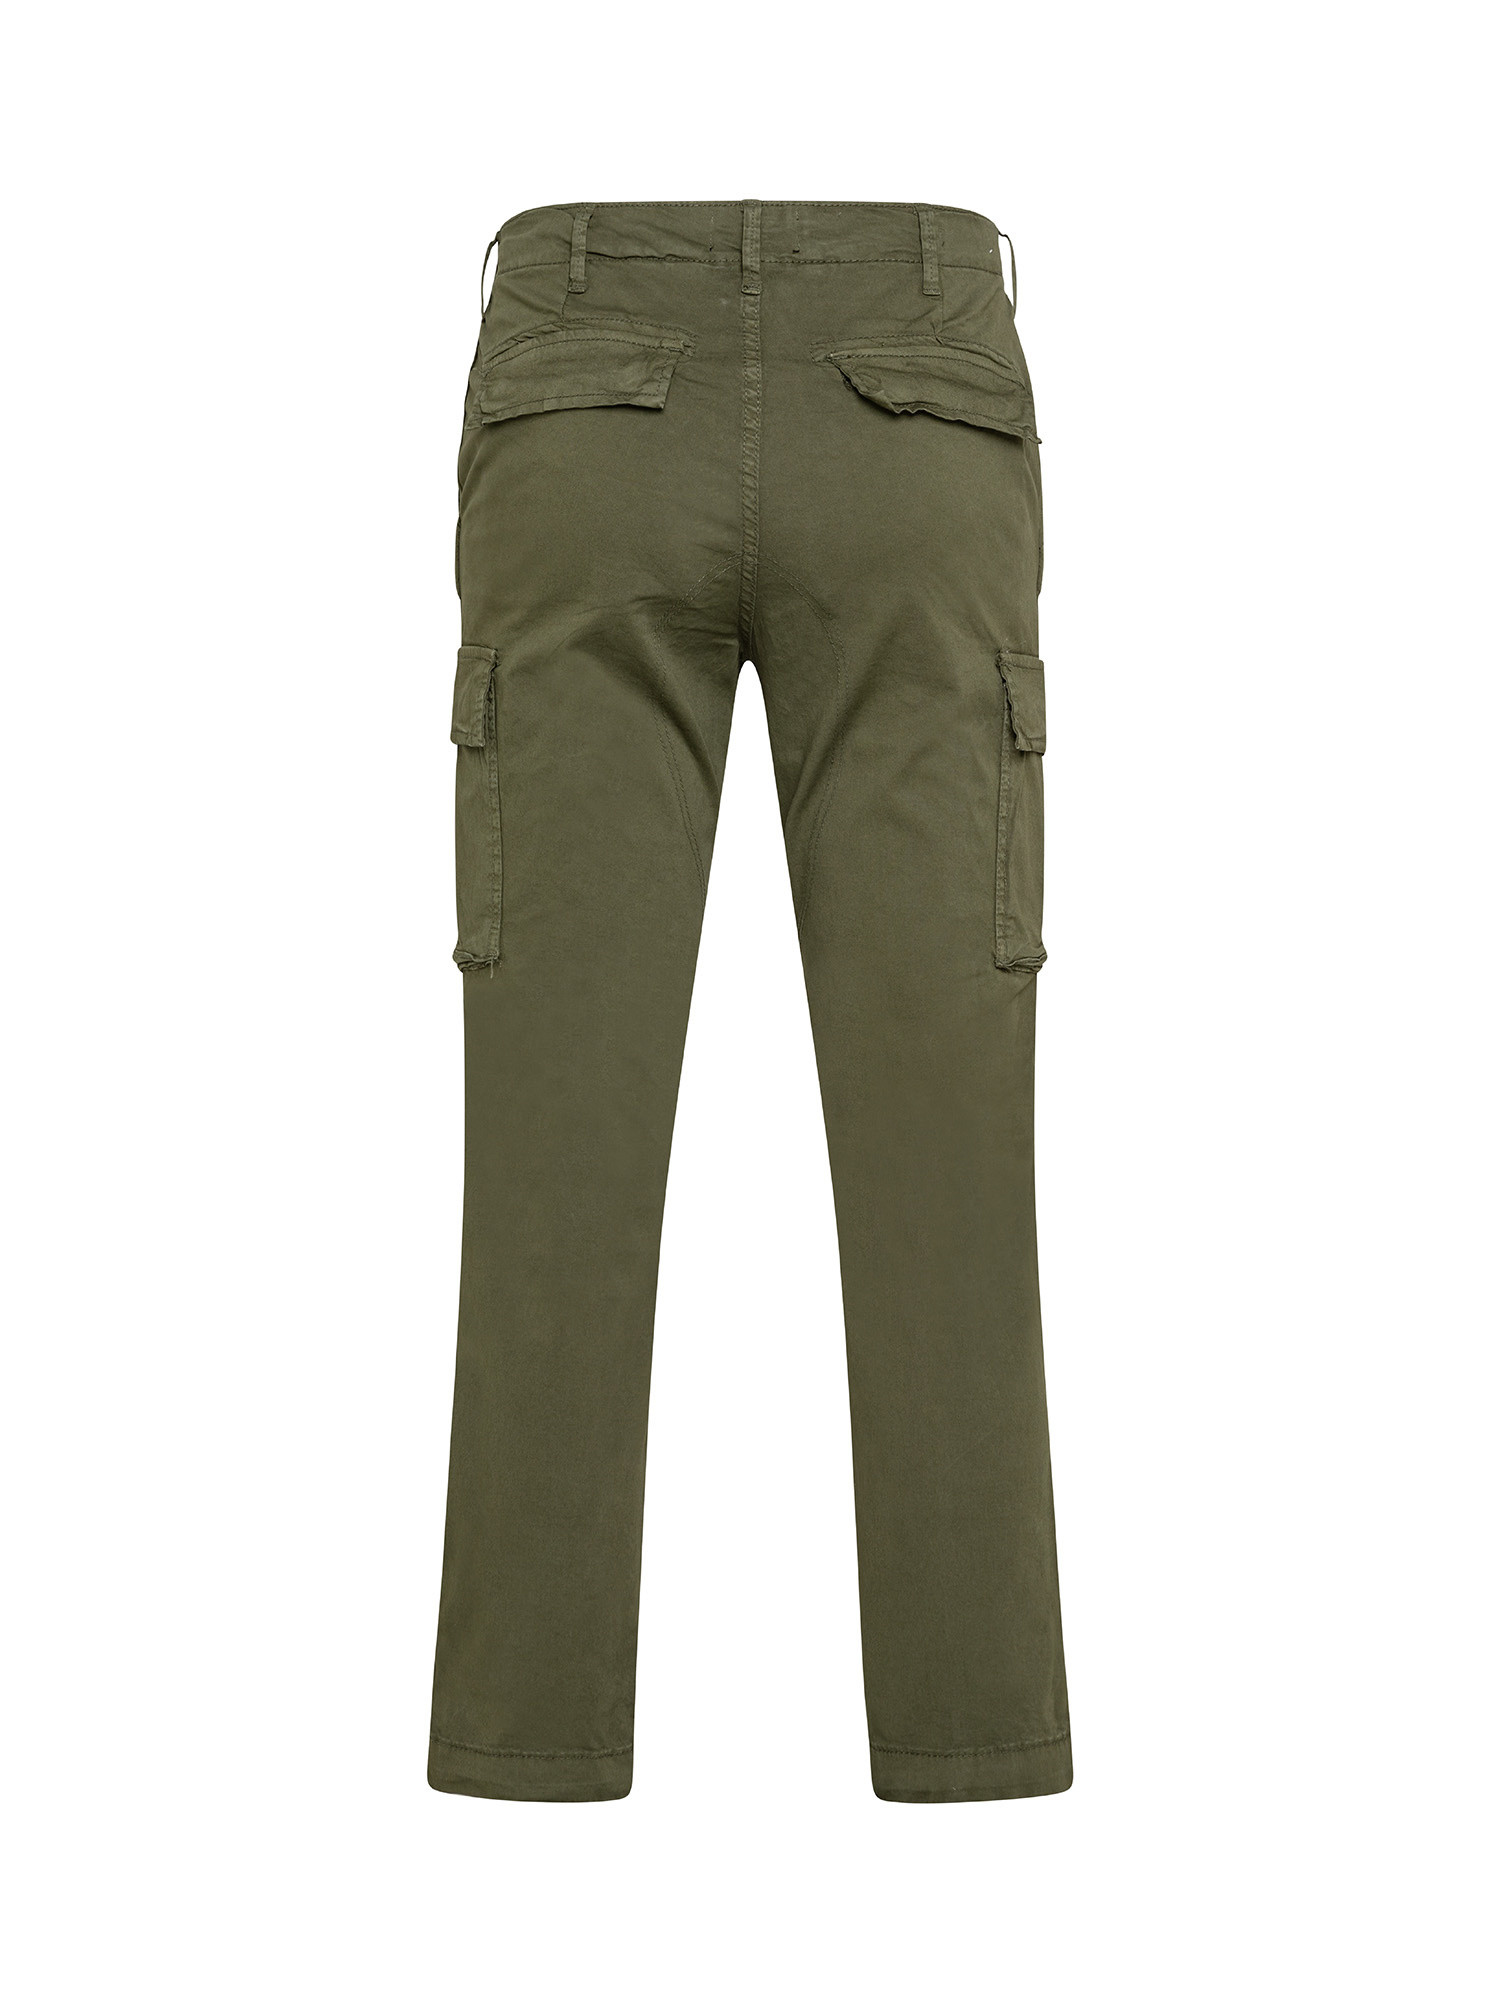 Cargo pants with side pockets, Green, large image number 1